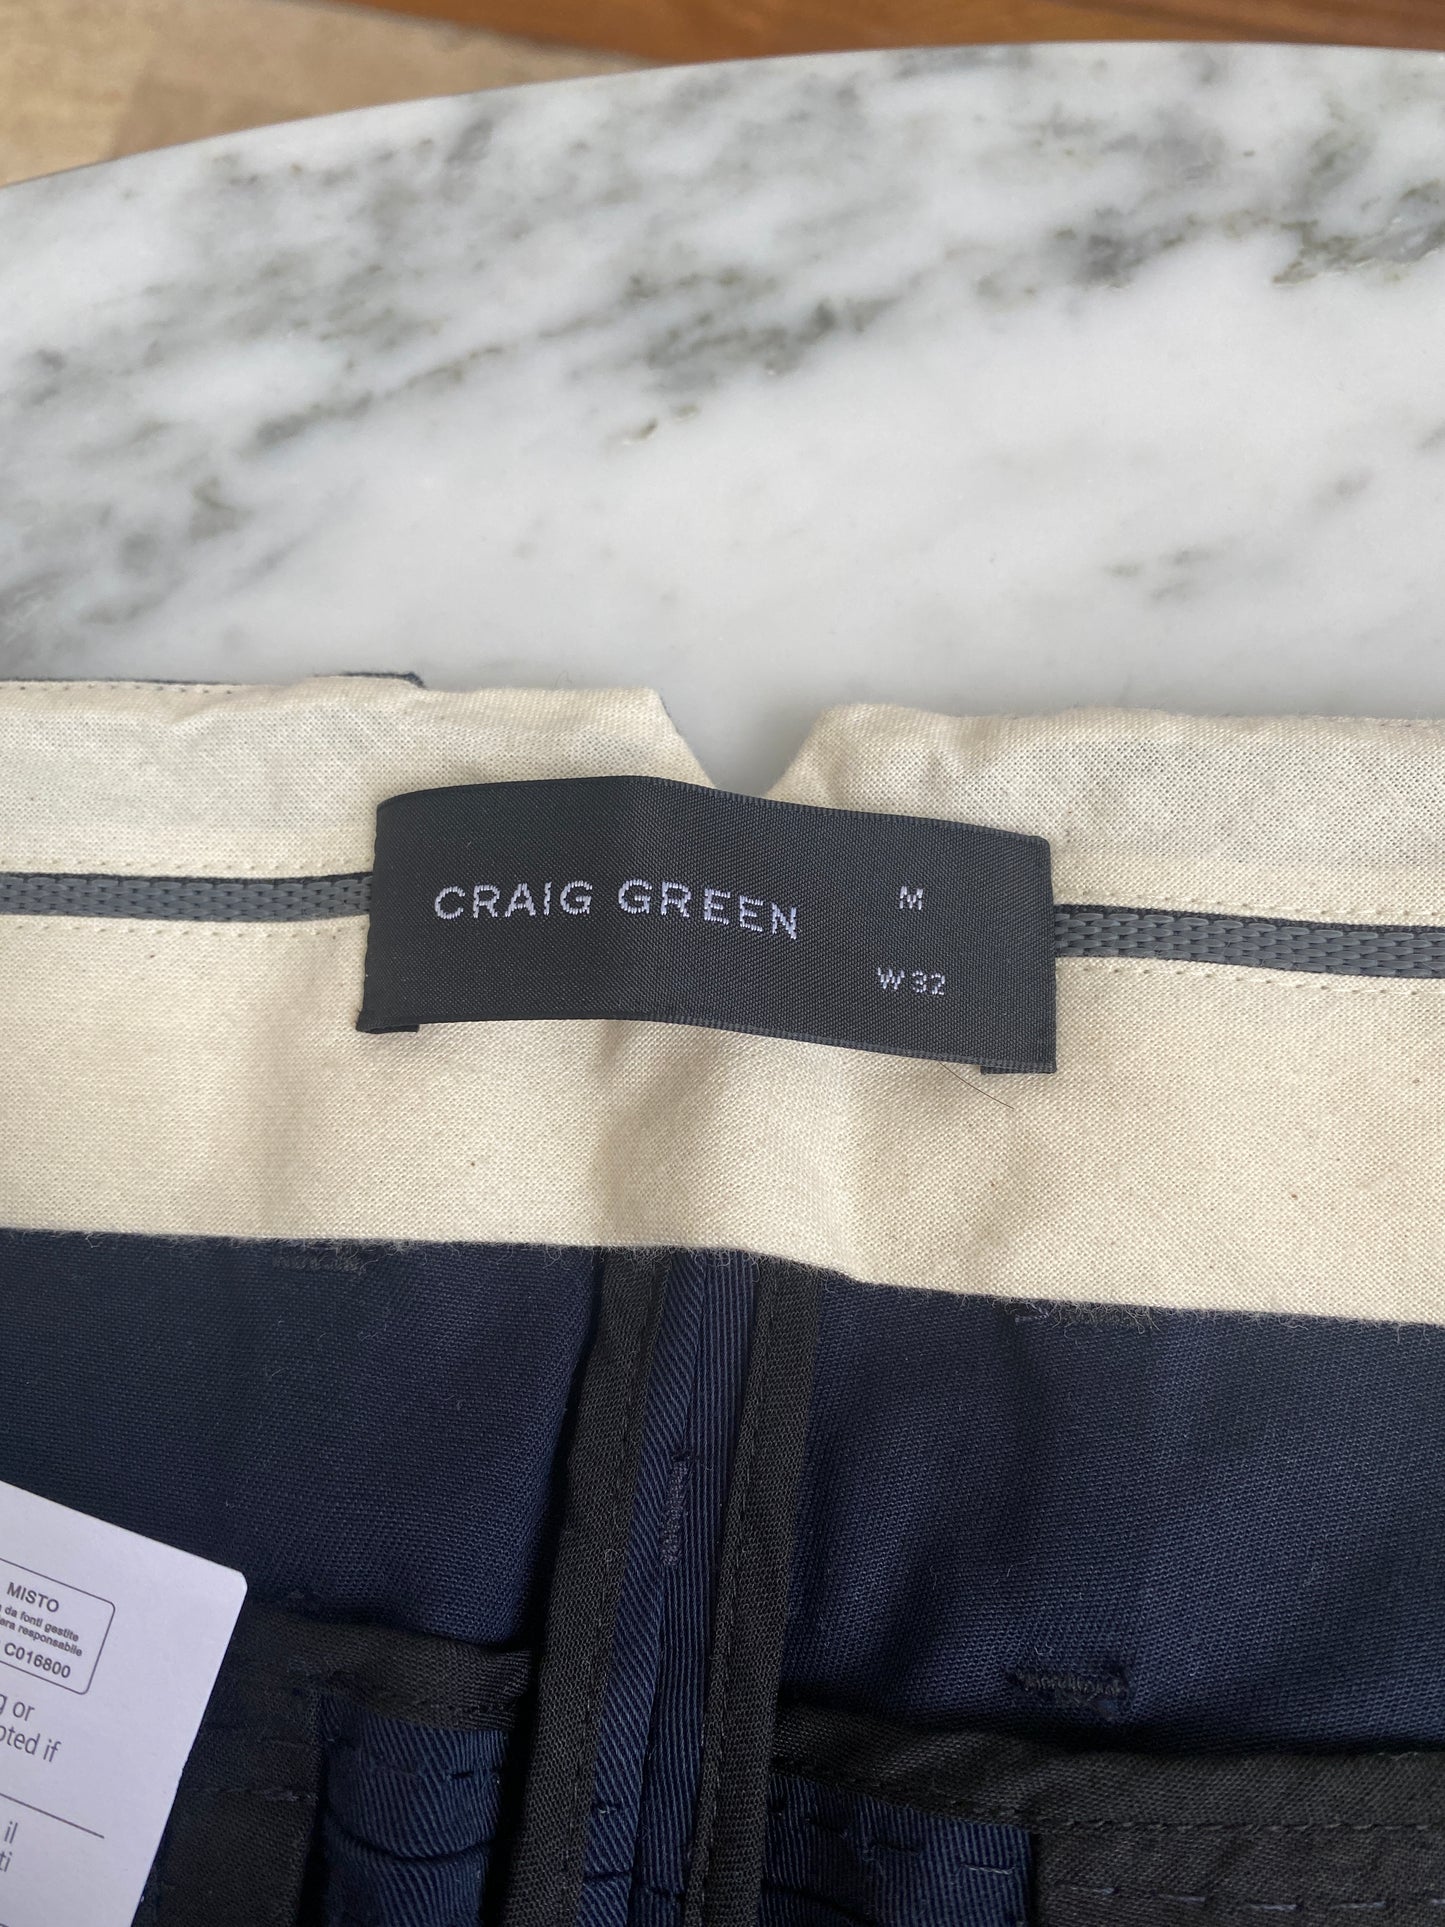 Craig Green - Navy Blue Lace Detail Twill Pants